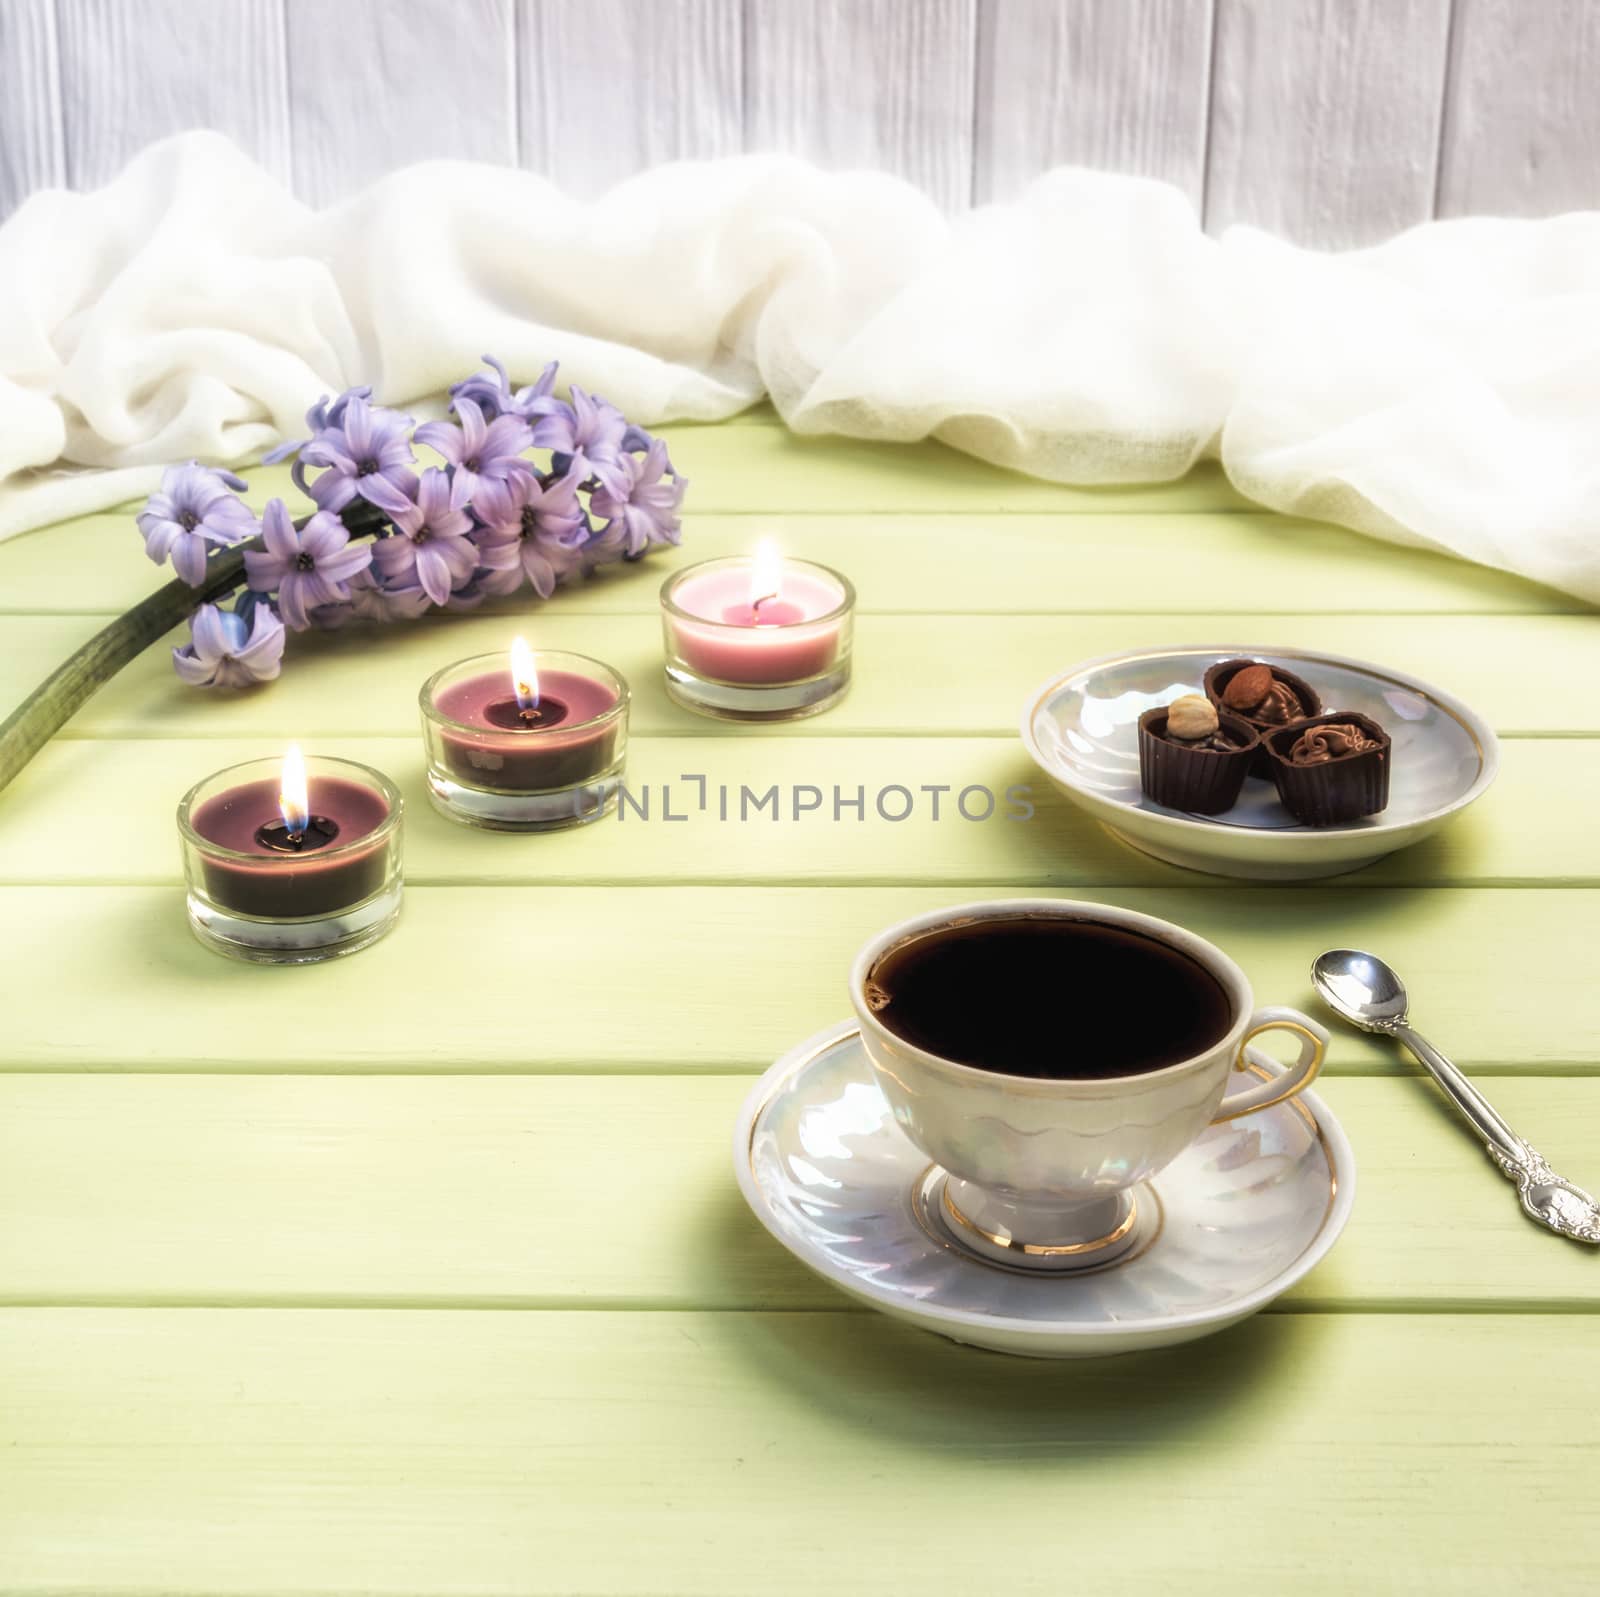 Cup of black coffee, candles and flowers on a wooden background.